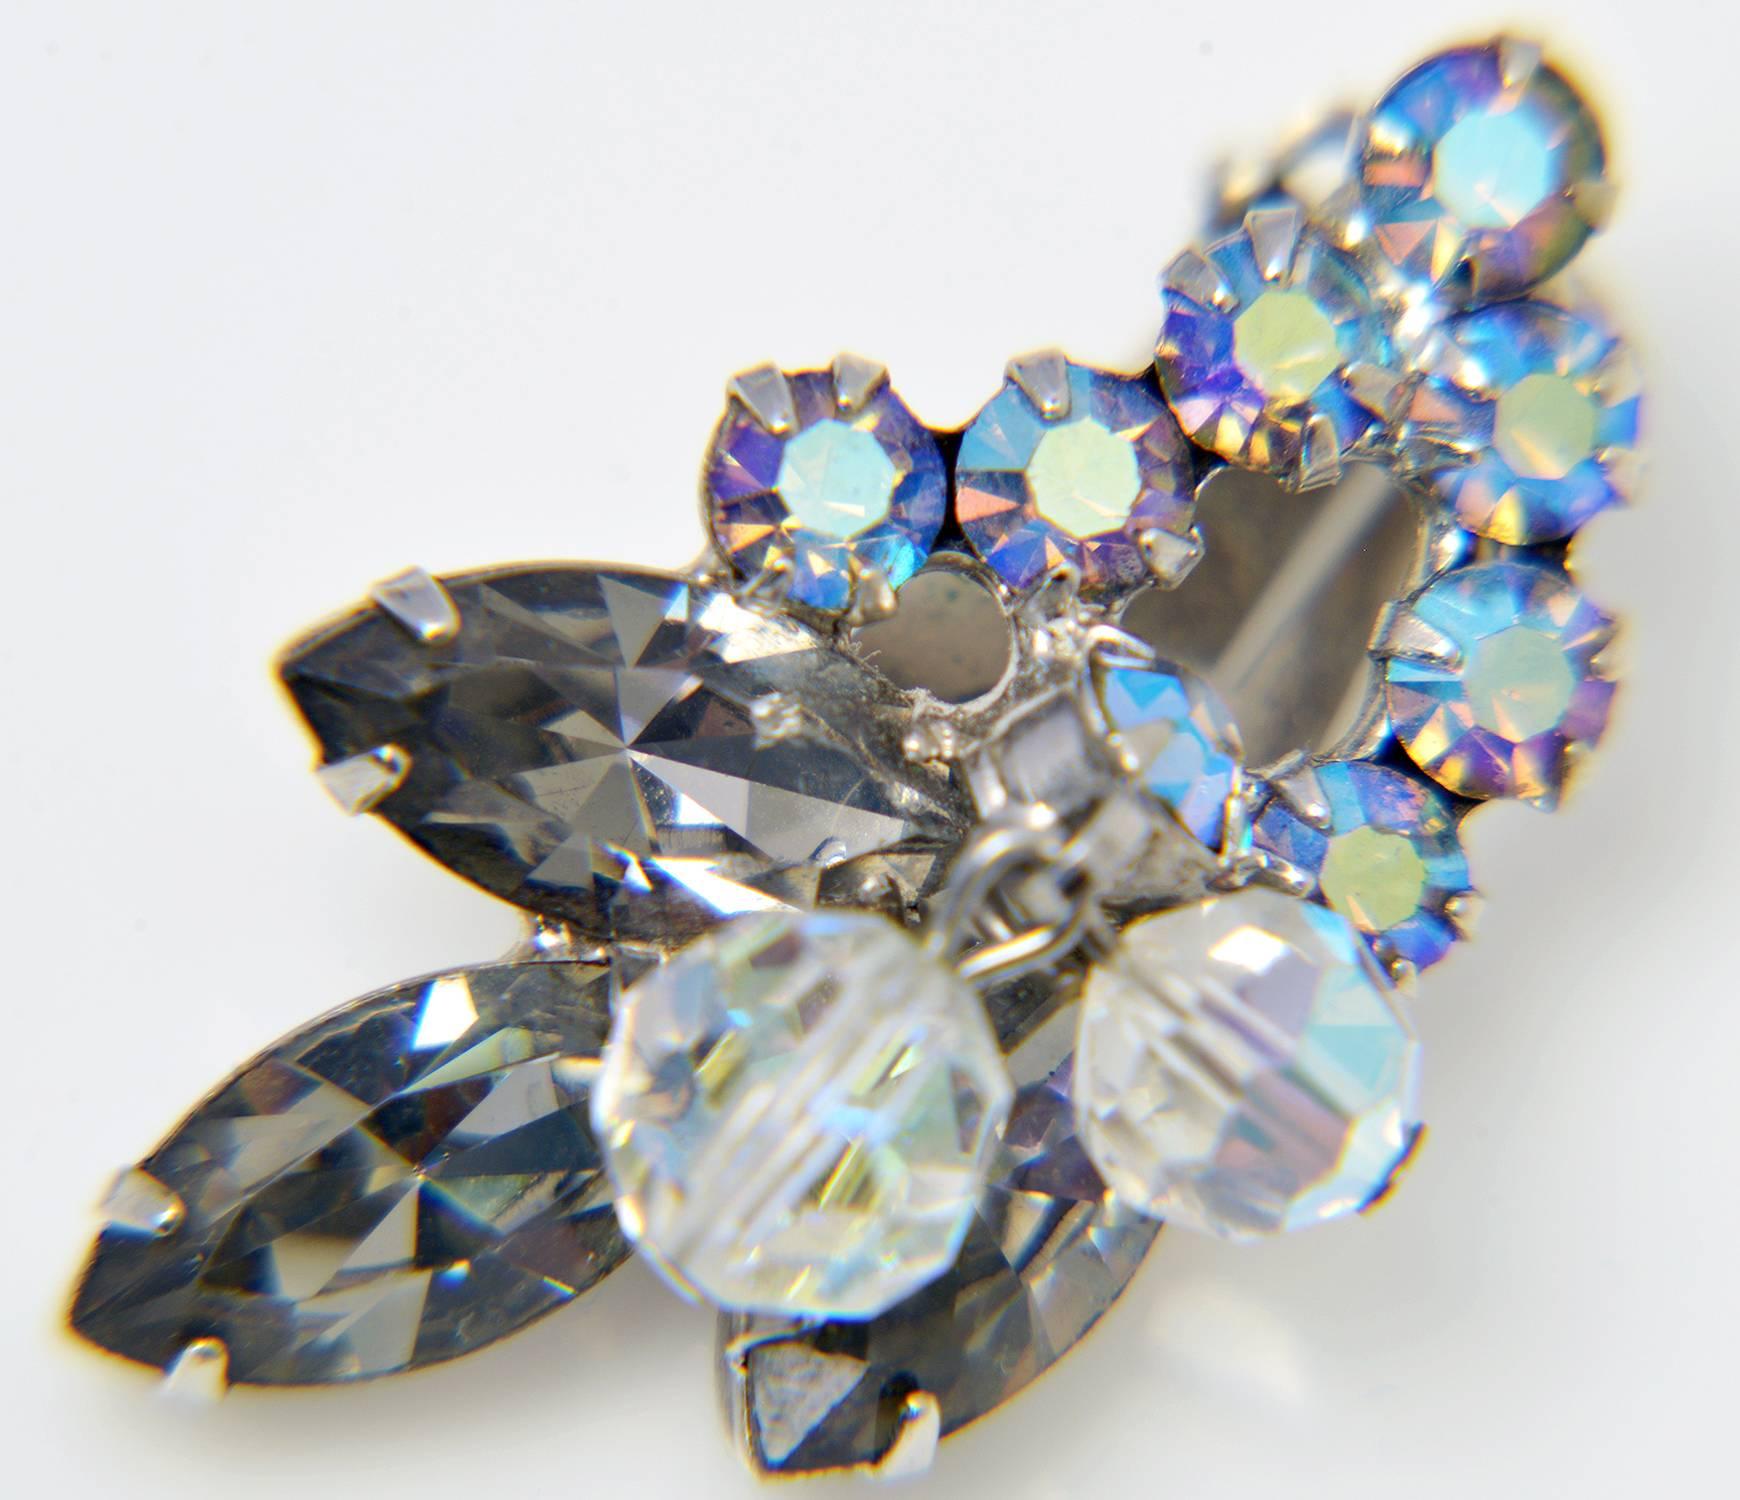 Vintage Juliana Iridescent Rhinestone Demi Parure. The demi parure was manufactured by Frank DeLizza and Harold Elster of Delizza and Elster (founded 1947). They manufactured jewelry for such designers as Hattie Carnegie, Hobe and Weiss. Juliana was